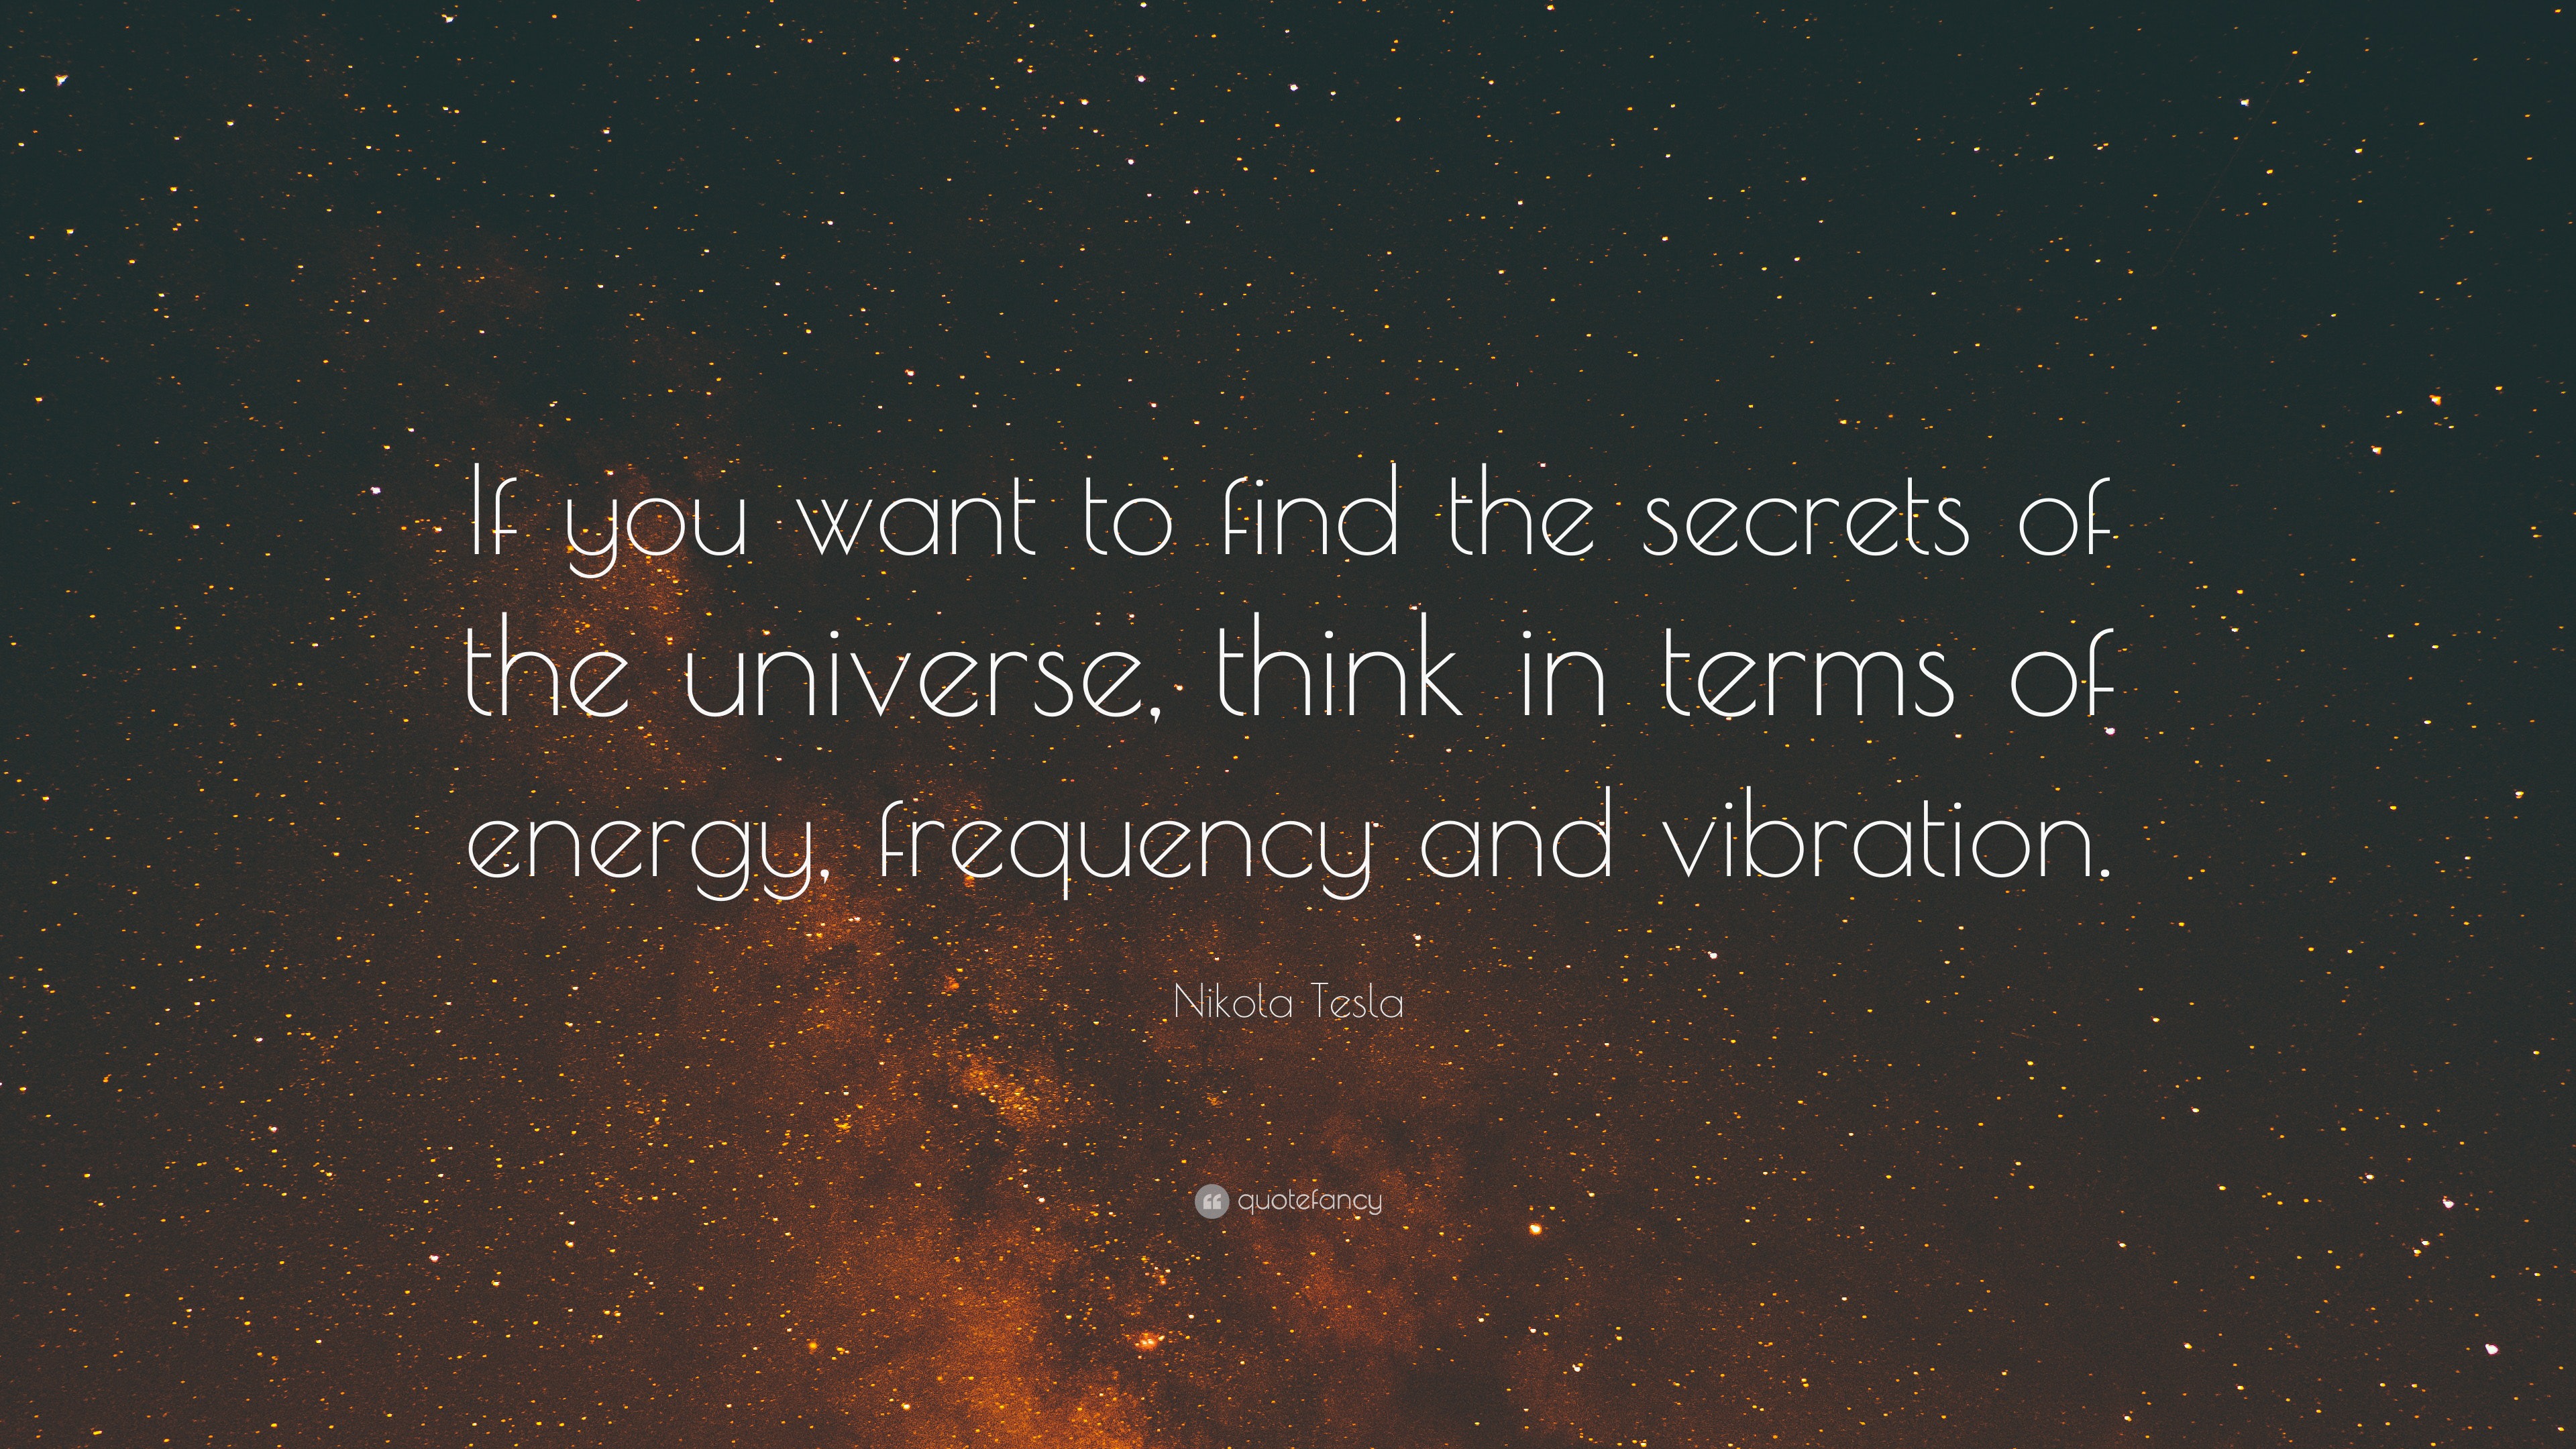 Nikola Tesla Quote: “If you want to find the secrets of the universe ...